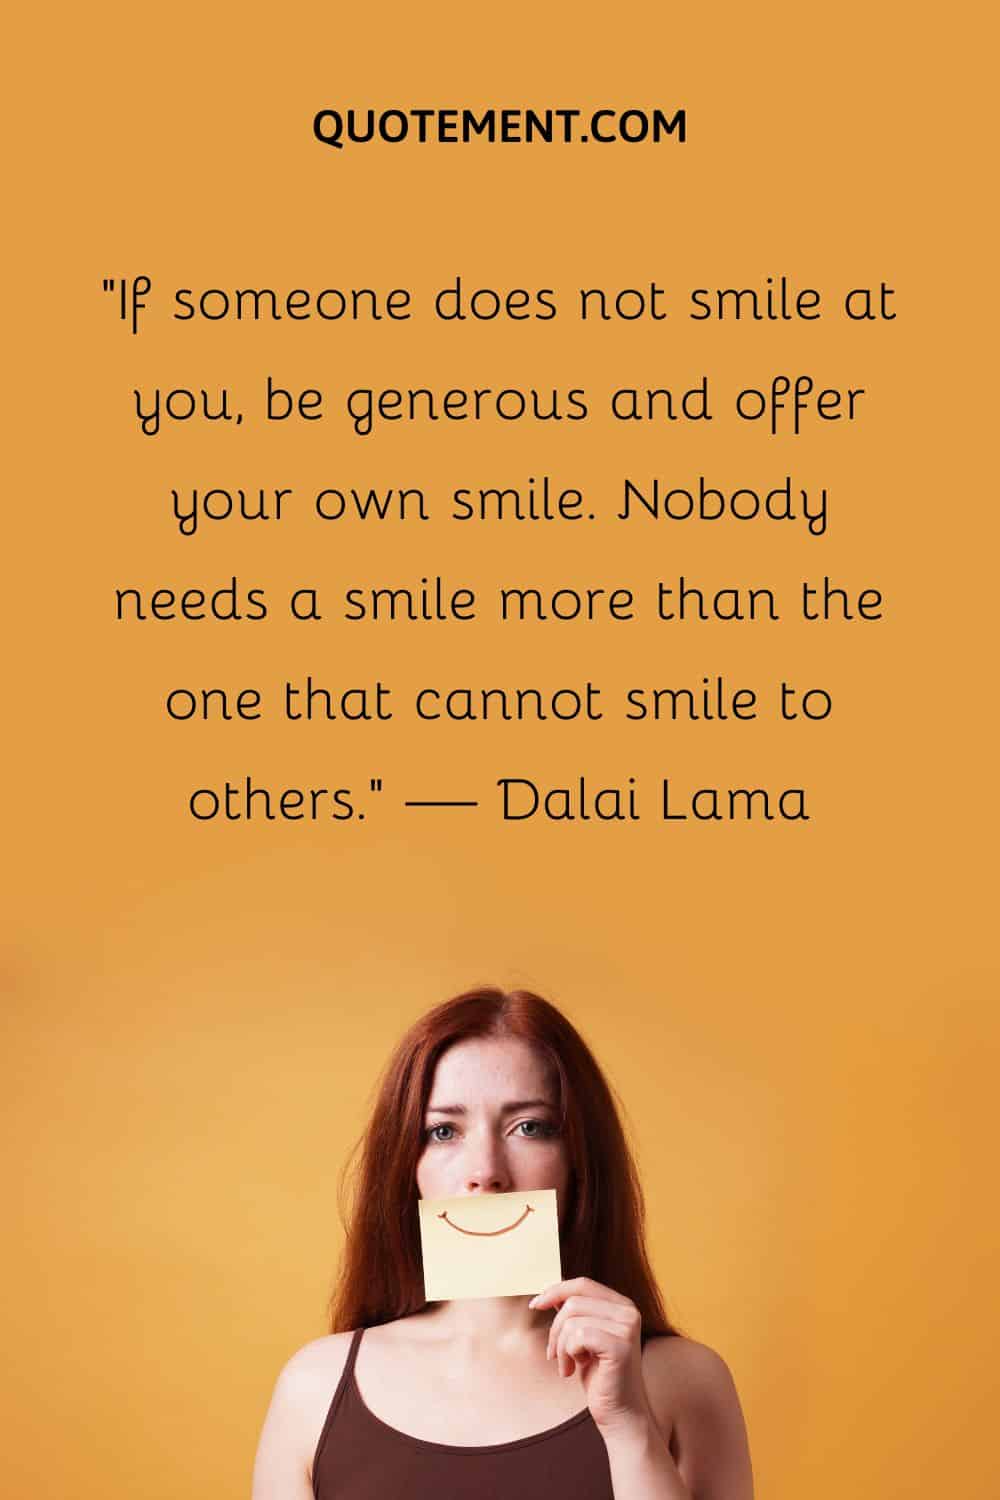 If someone does not smile at you, be generous and offer your own smile.